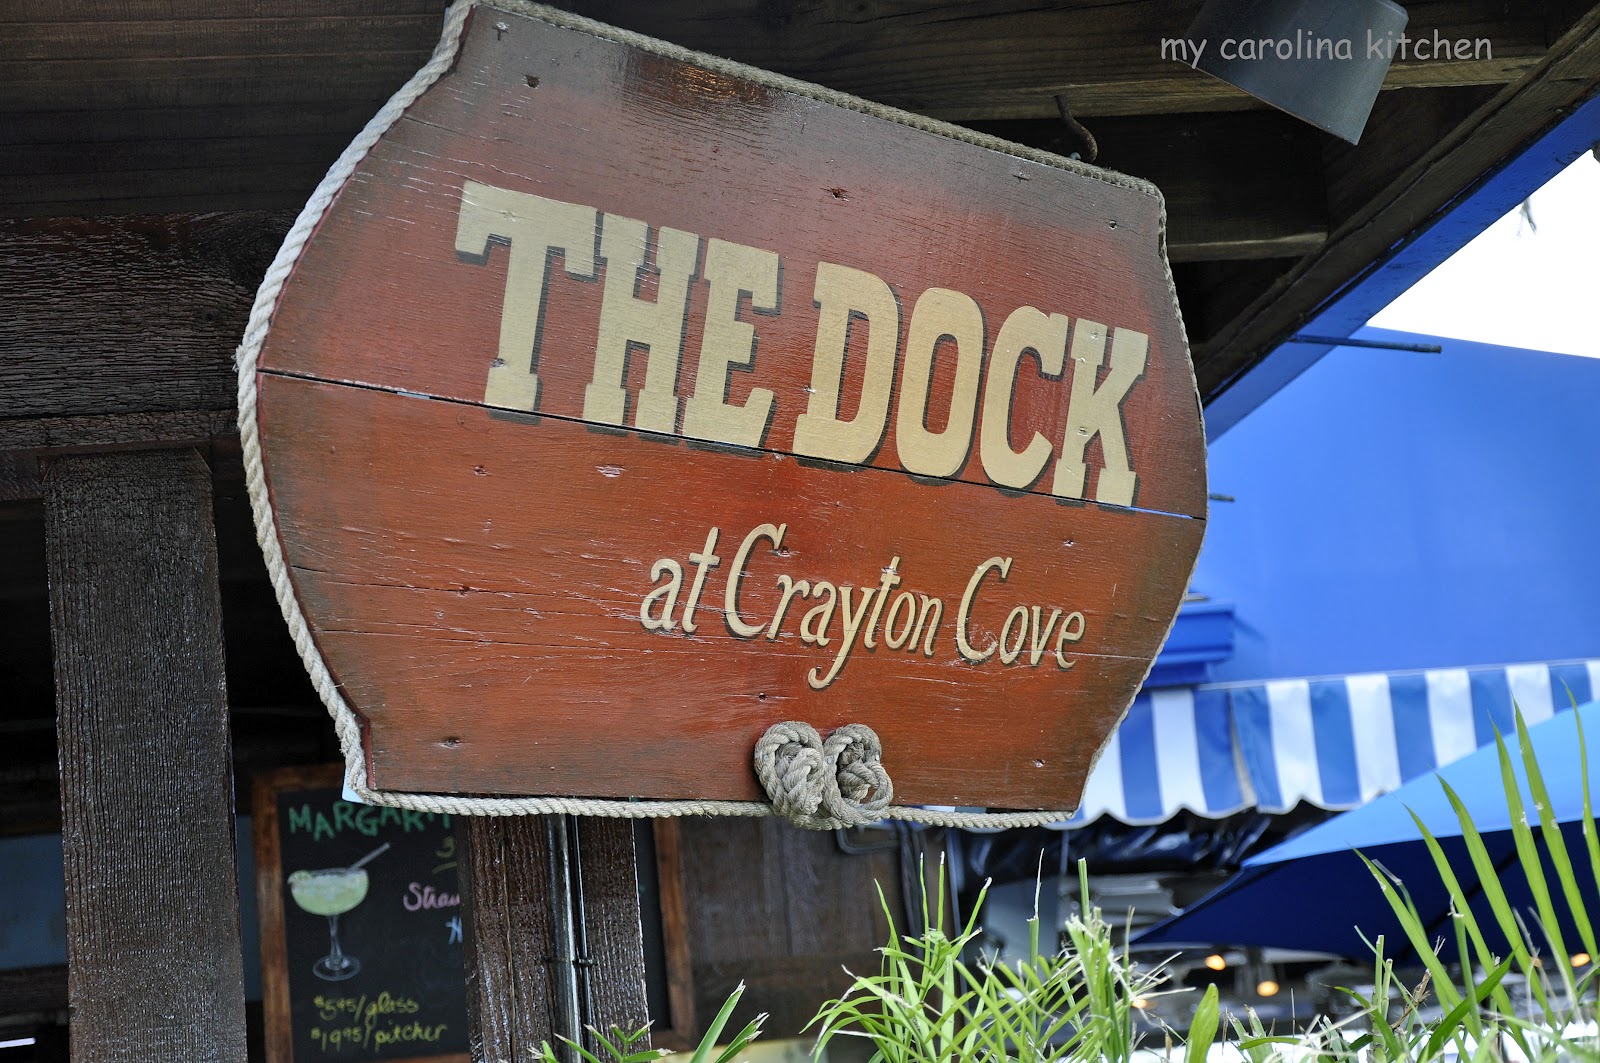 My Carolina Kitchen: The Dock at Crayton Cove - a Tropical Taste of old